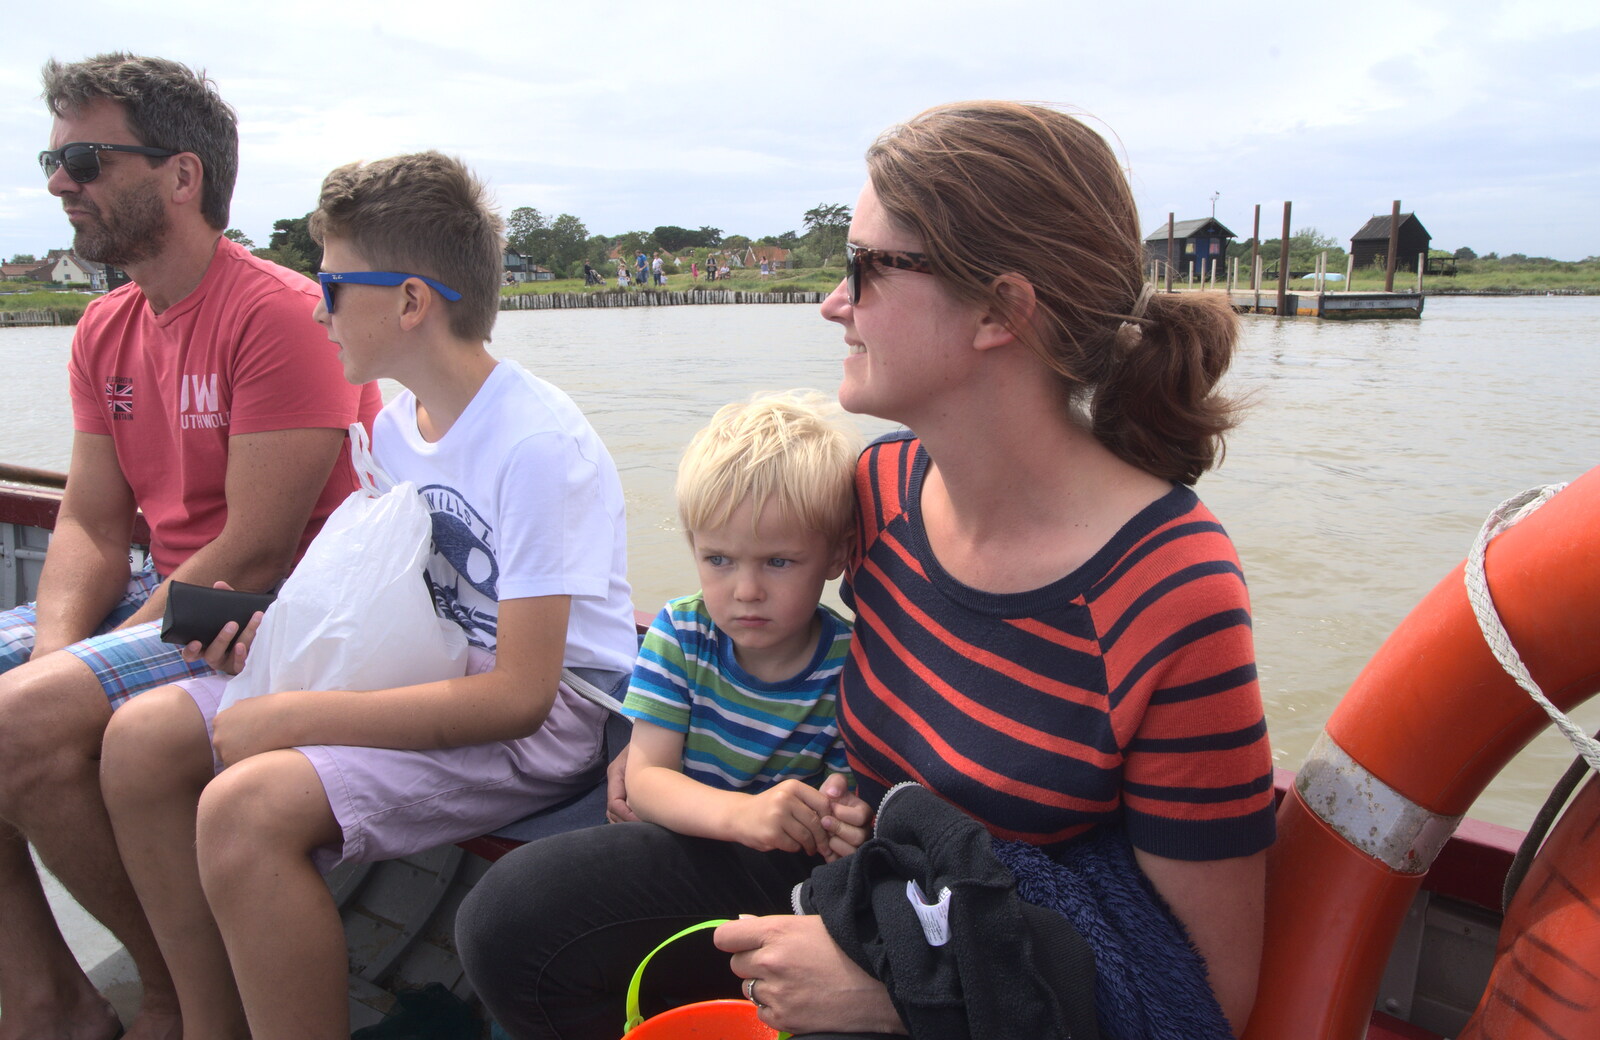 Harry doesn't look too keen on the ferry from The Danger of Trees: A Camping (Mis)adventure - Southwold, Suffolk - 3rd August 2015